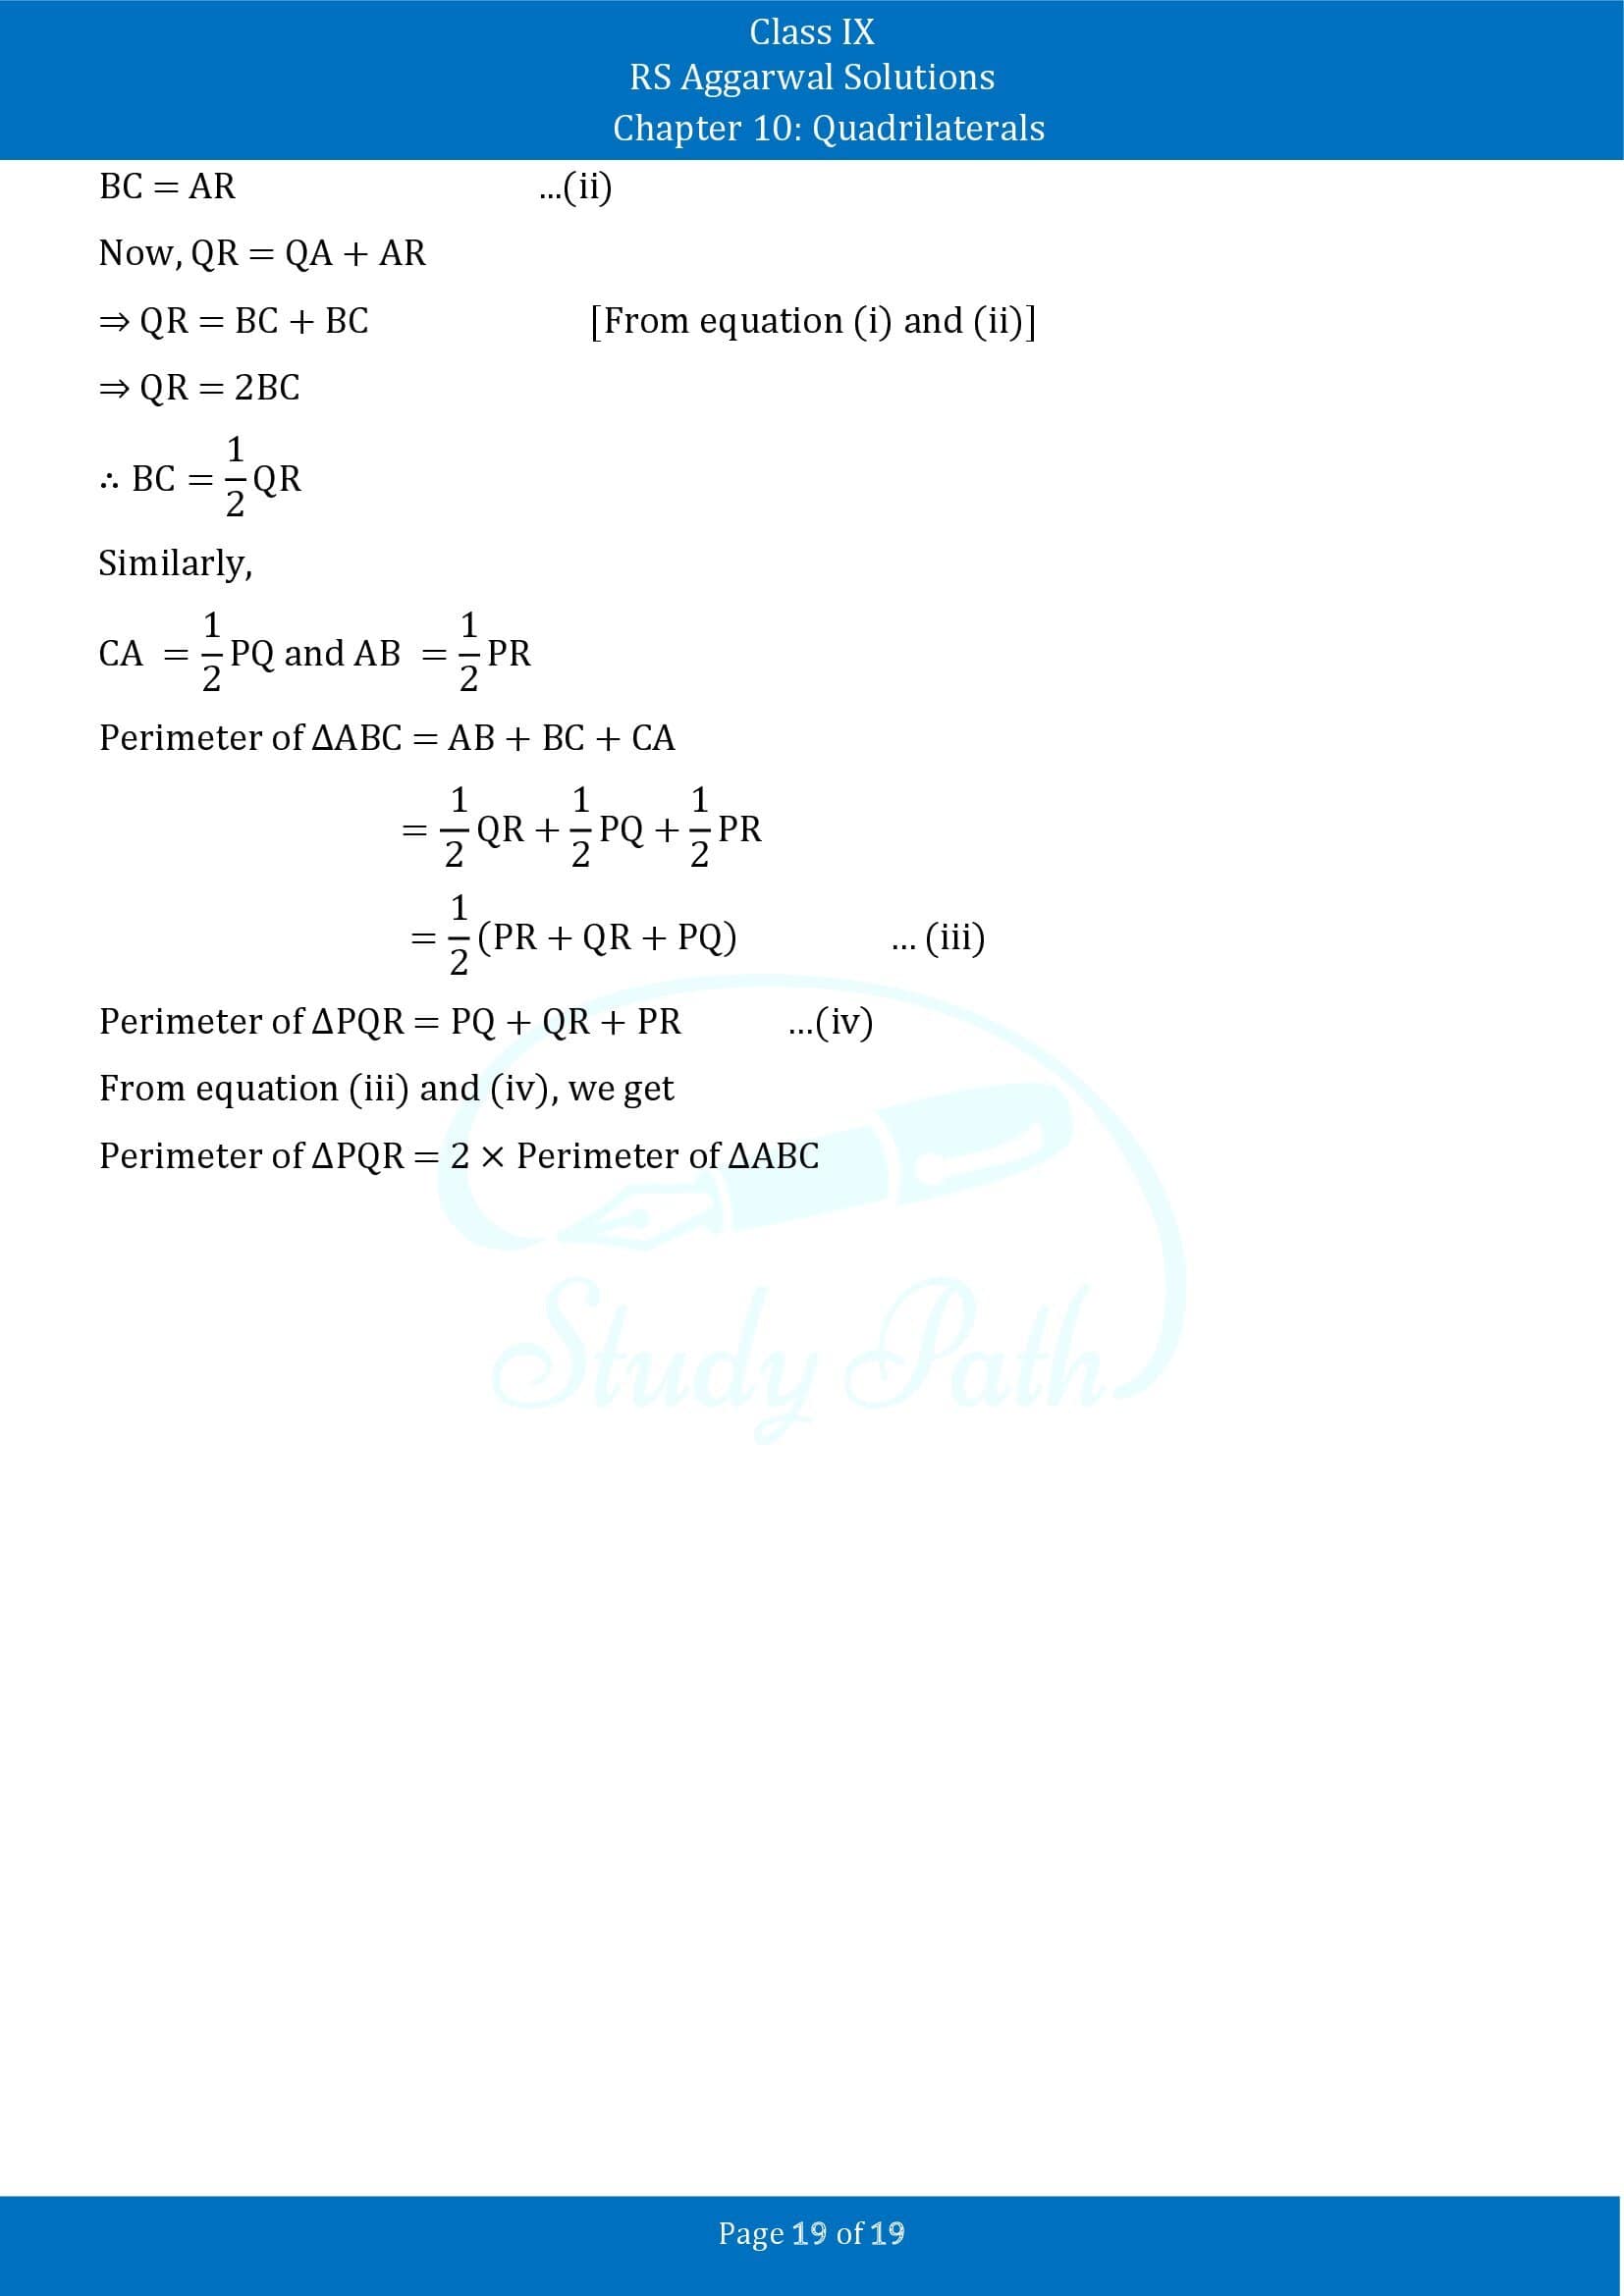 RS Aggarwal Solutions Class 9 Chapter 10 Quadrilaterals Exercise 10B 00019